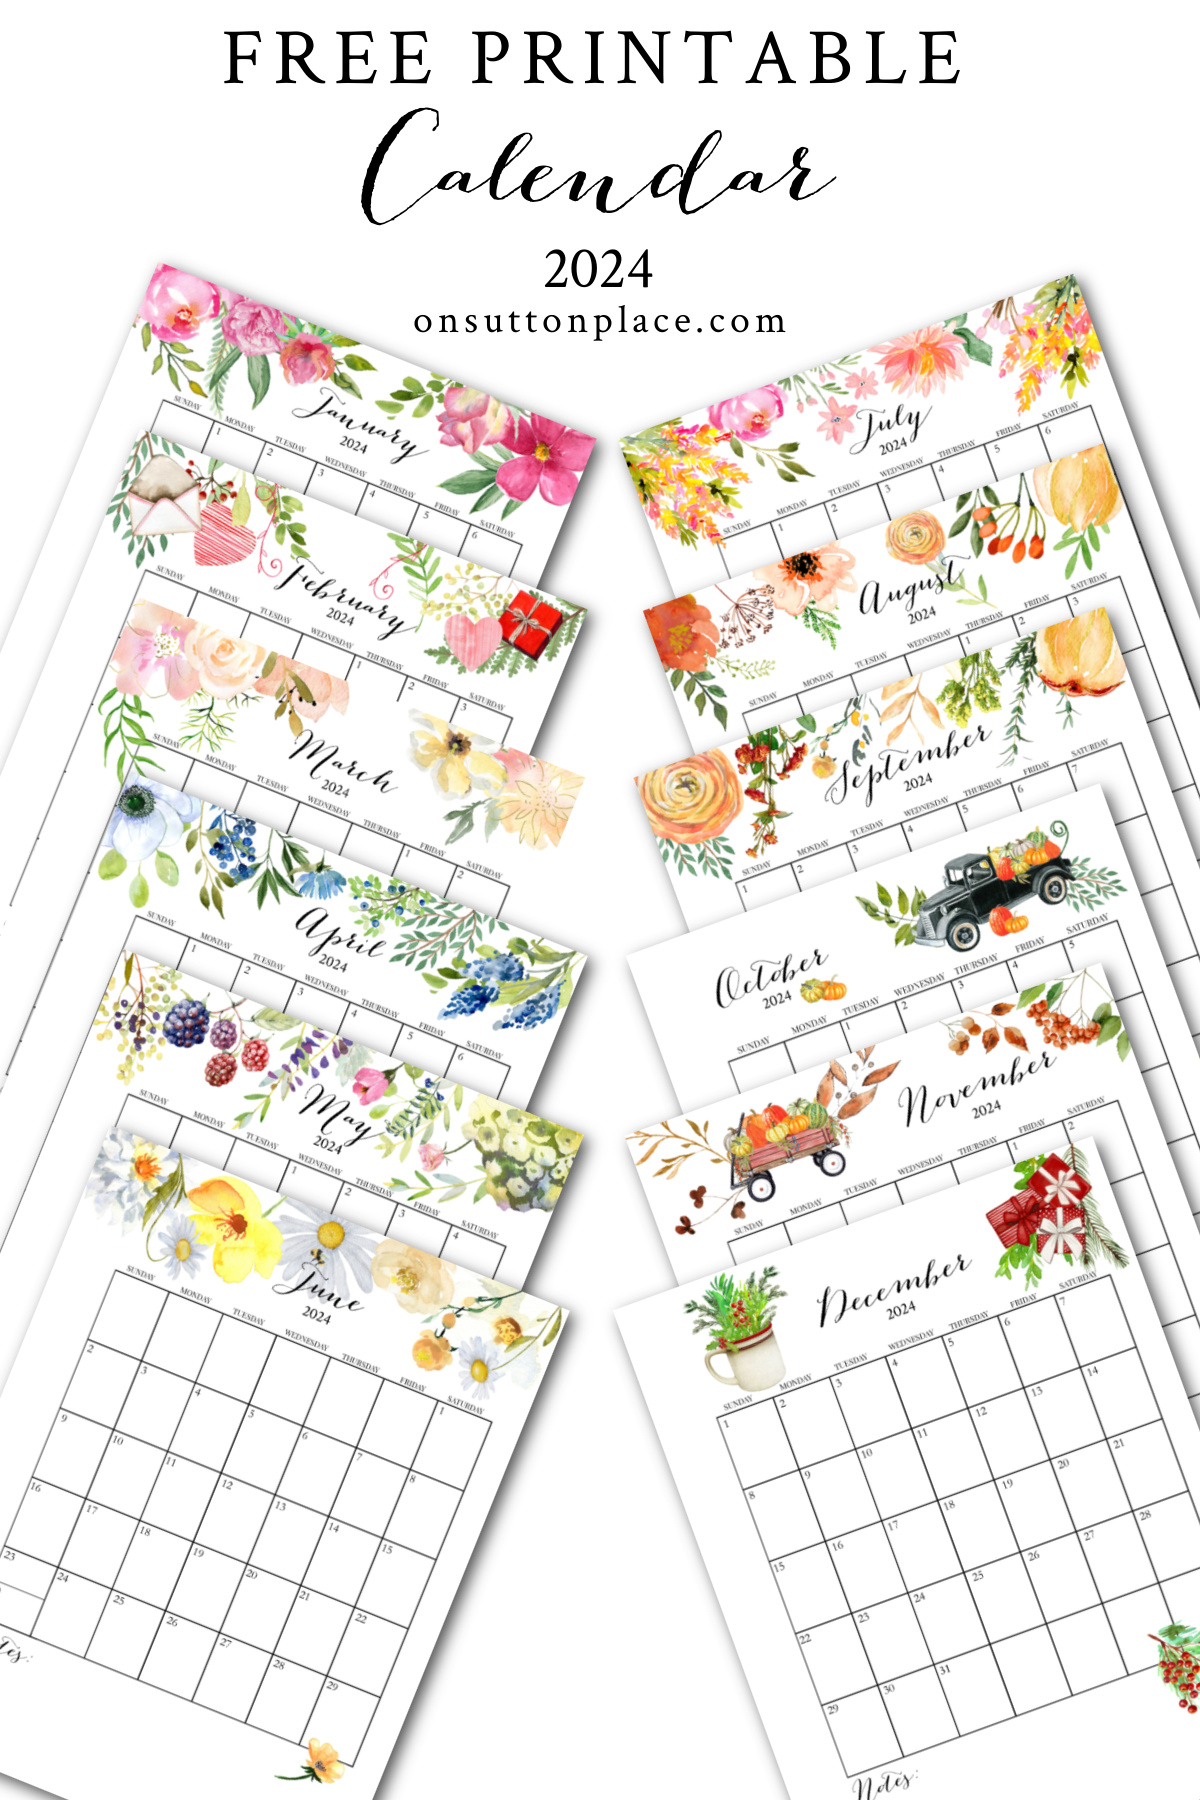 Free Printable Planner 2024 – Happy Templates You'll Love!